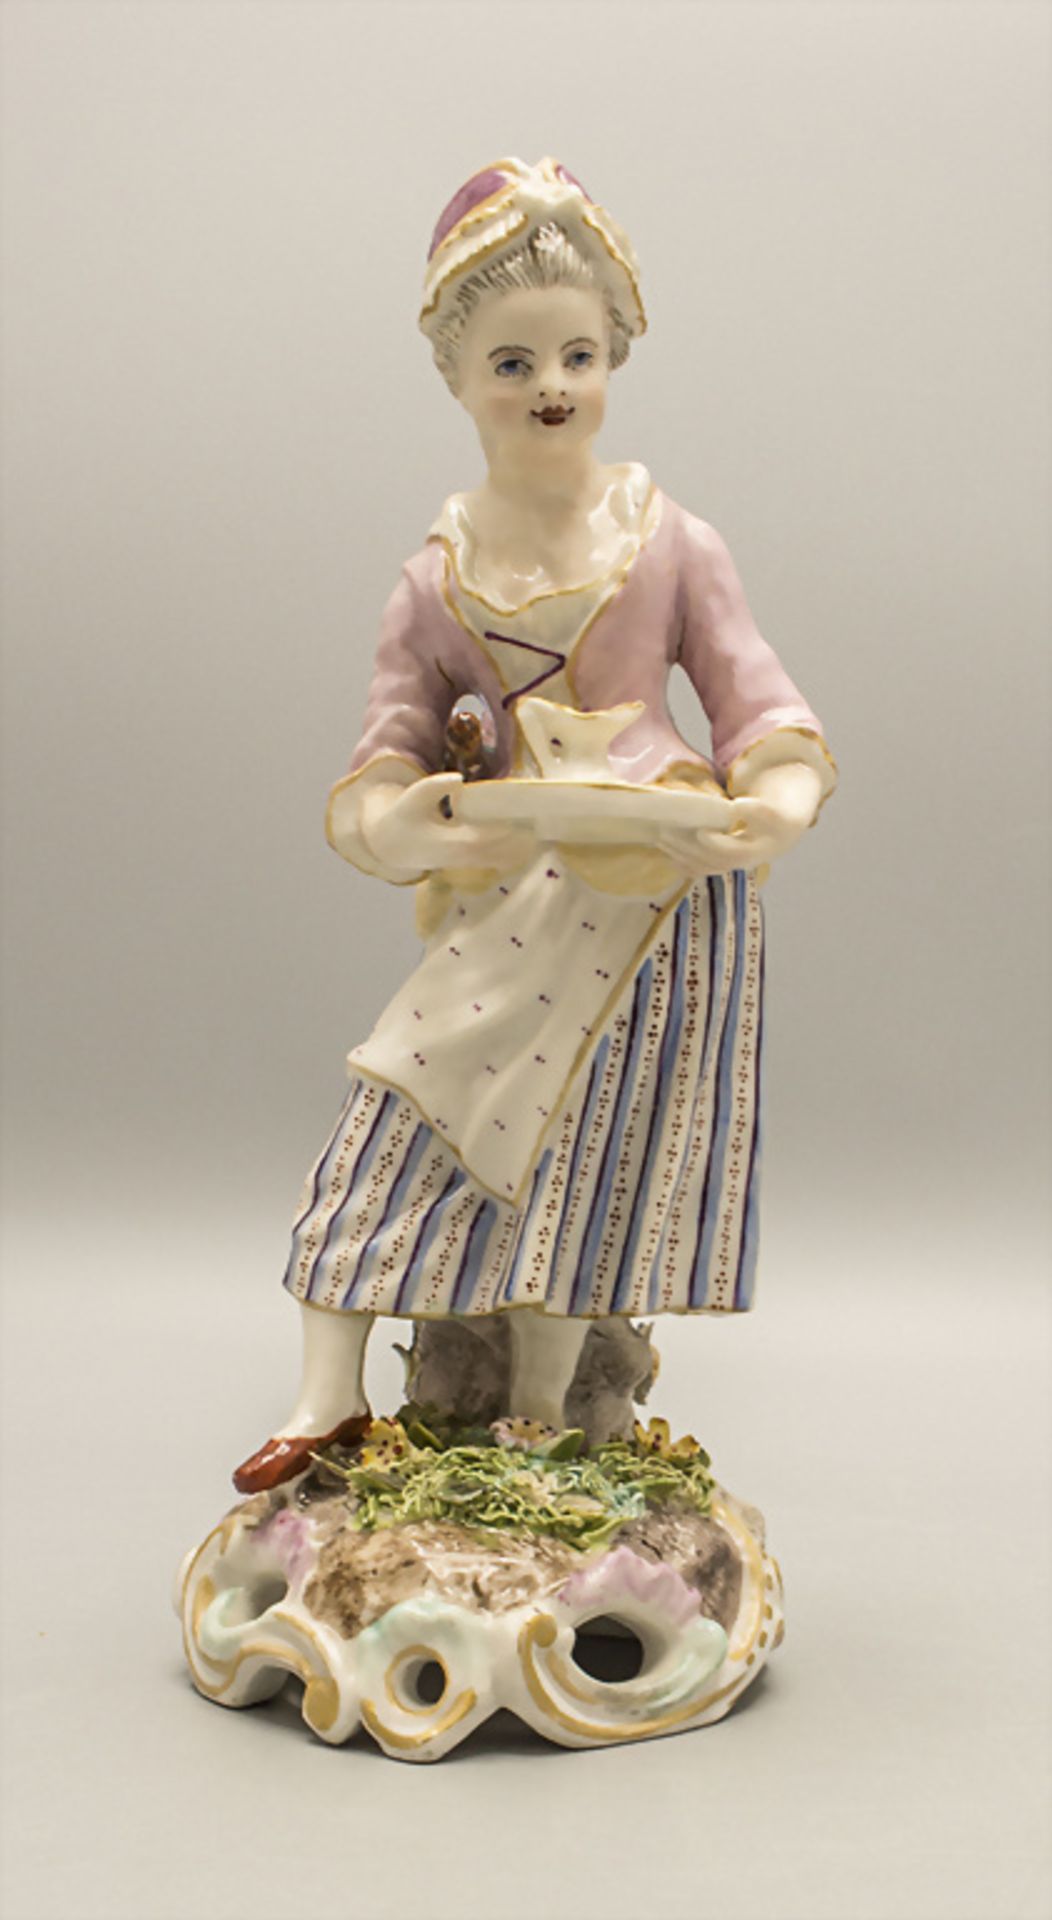 Figur eines Hausmädchens / A figure of a housemaid, wohl Ende 18. Jh.